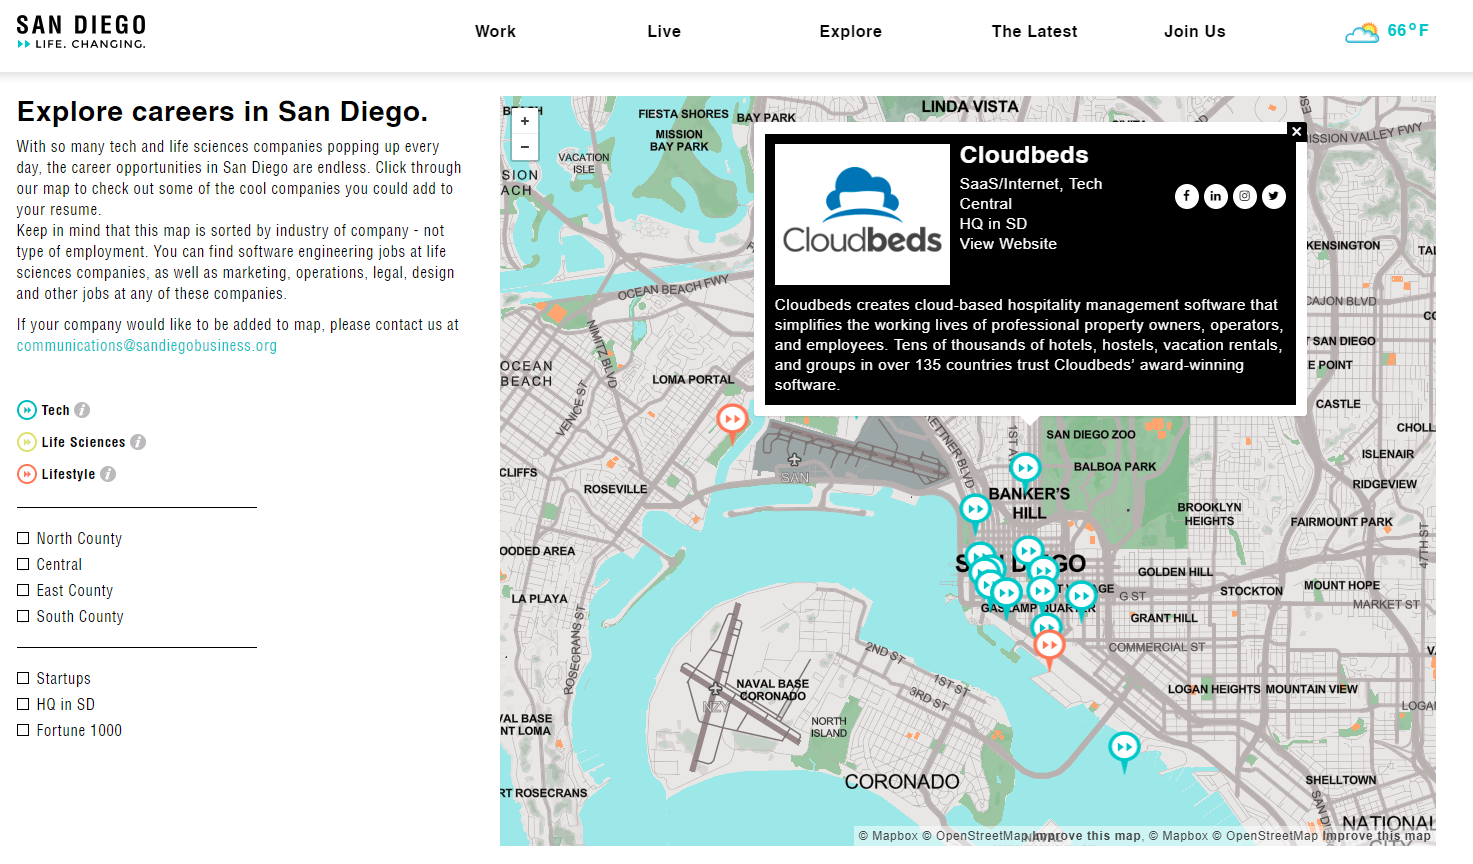 San Diego: Life. Changing. Map of Companies in San Diego 